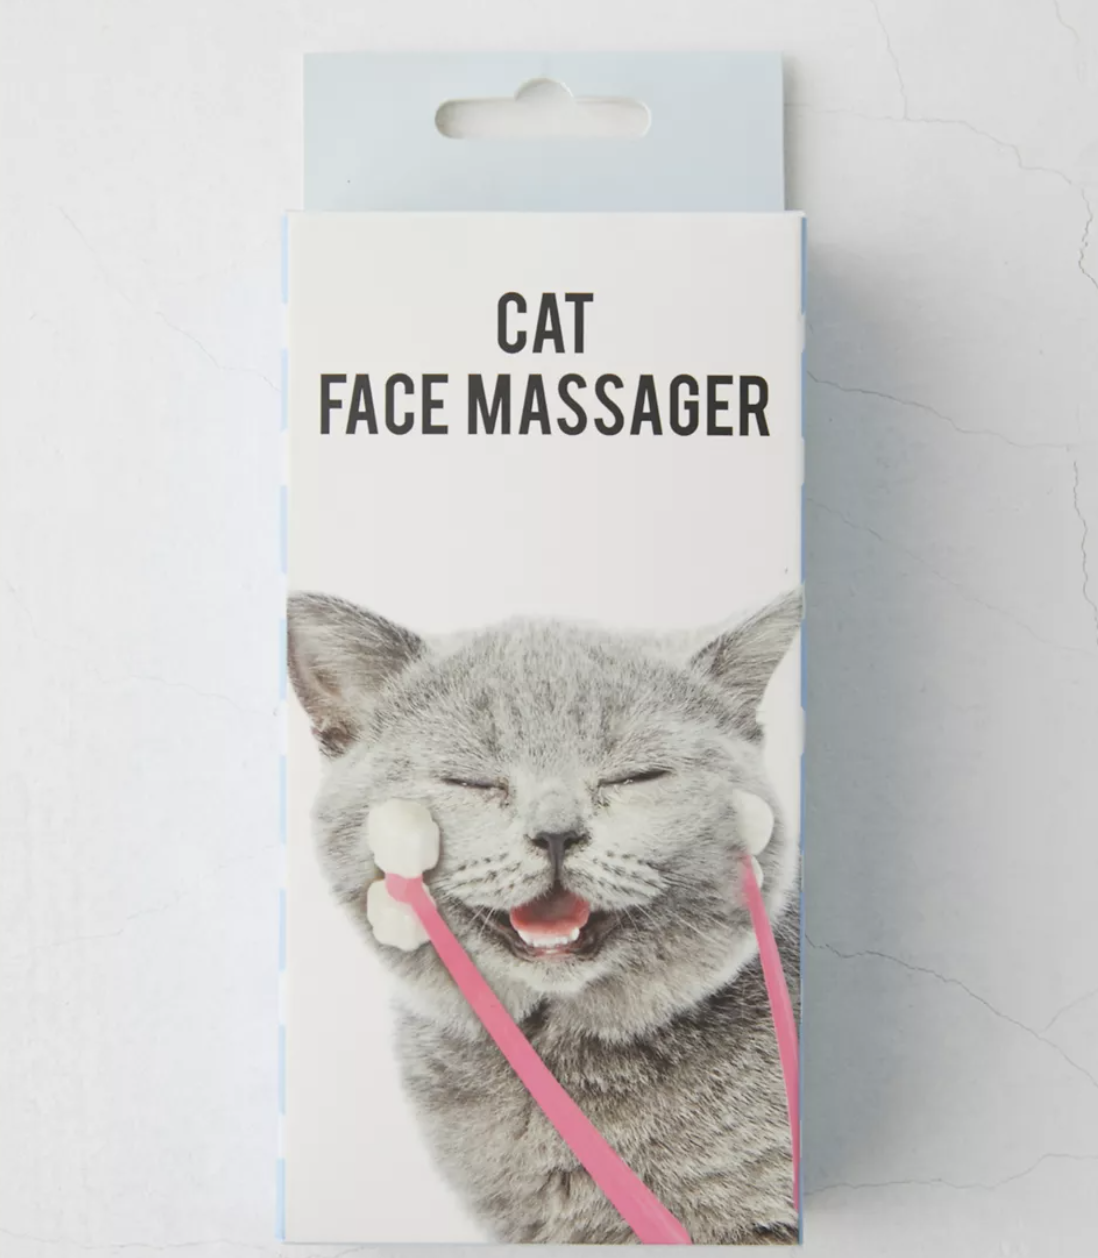 the box with a photo on it showing a cat&#x27;s face being massaged in front of a plain background